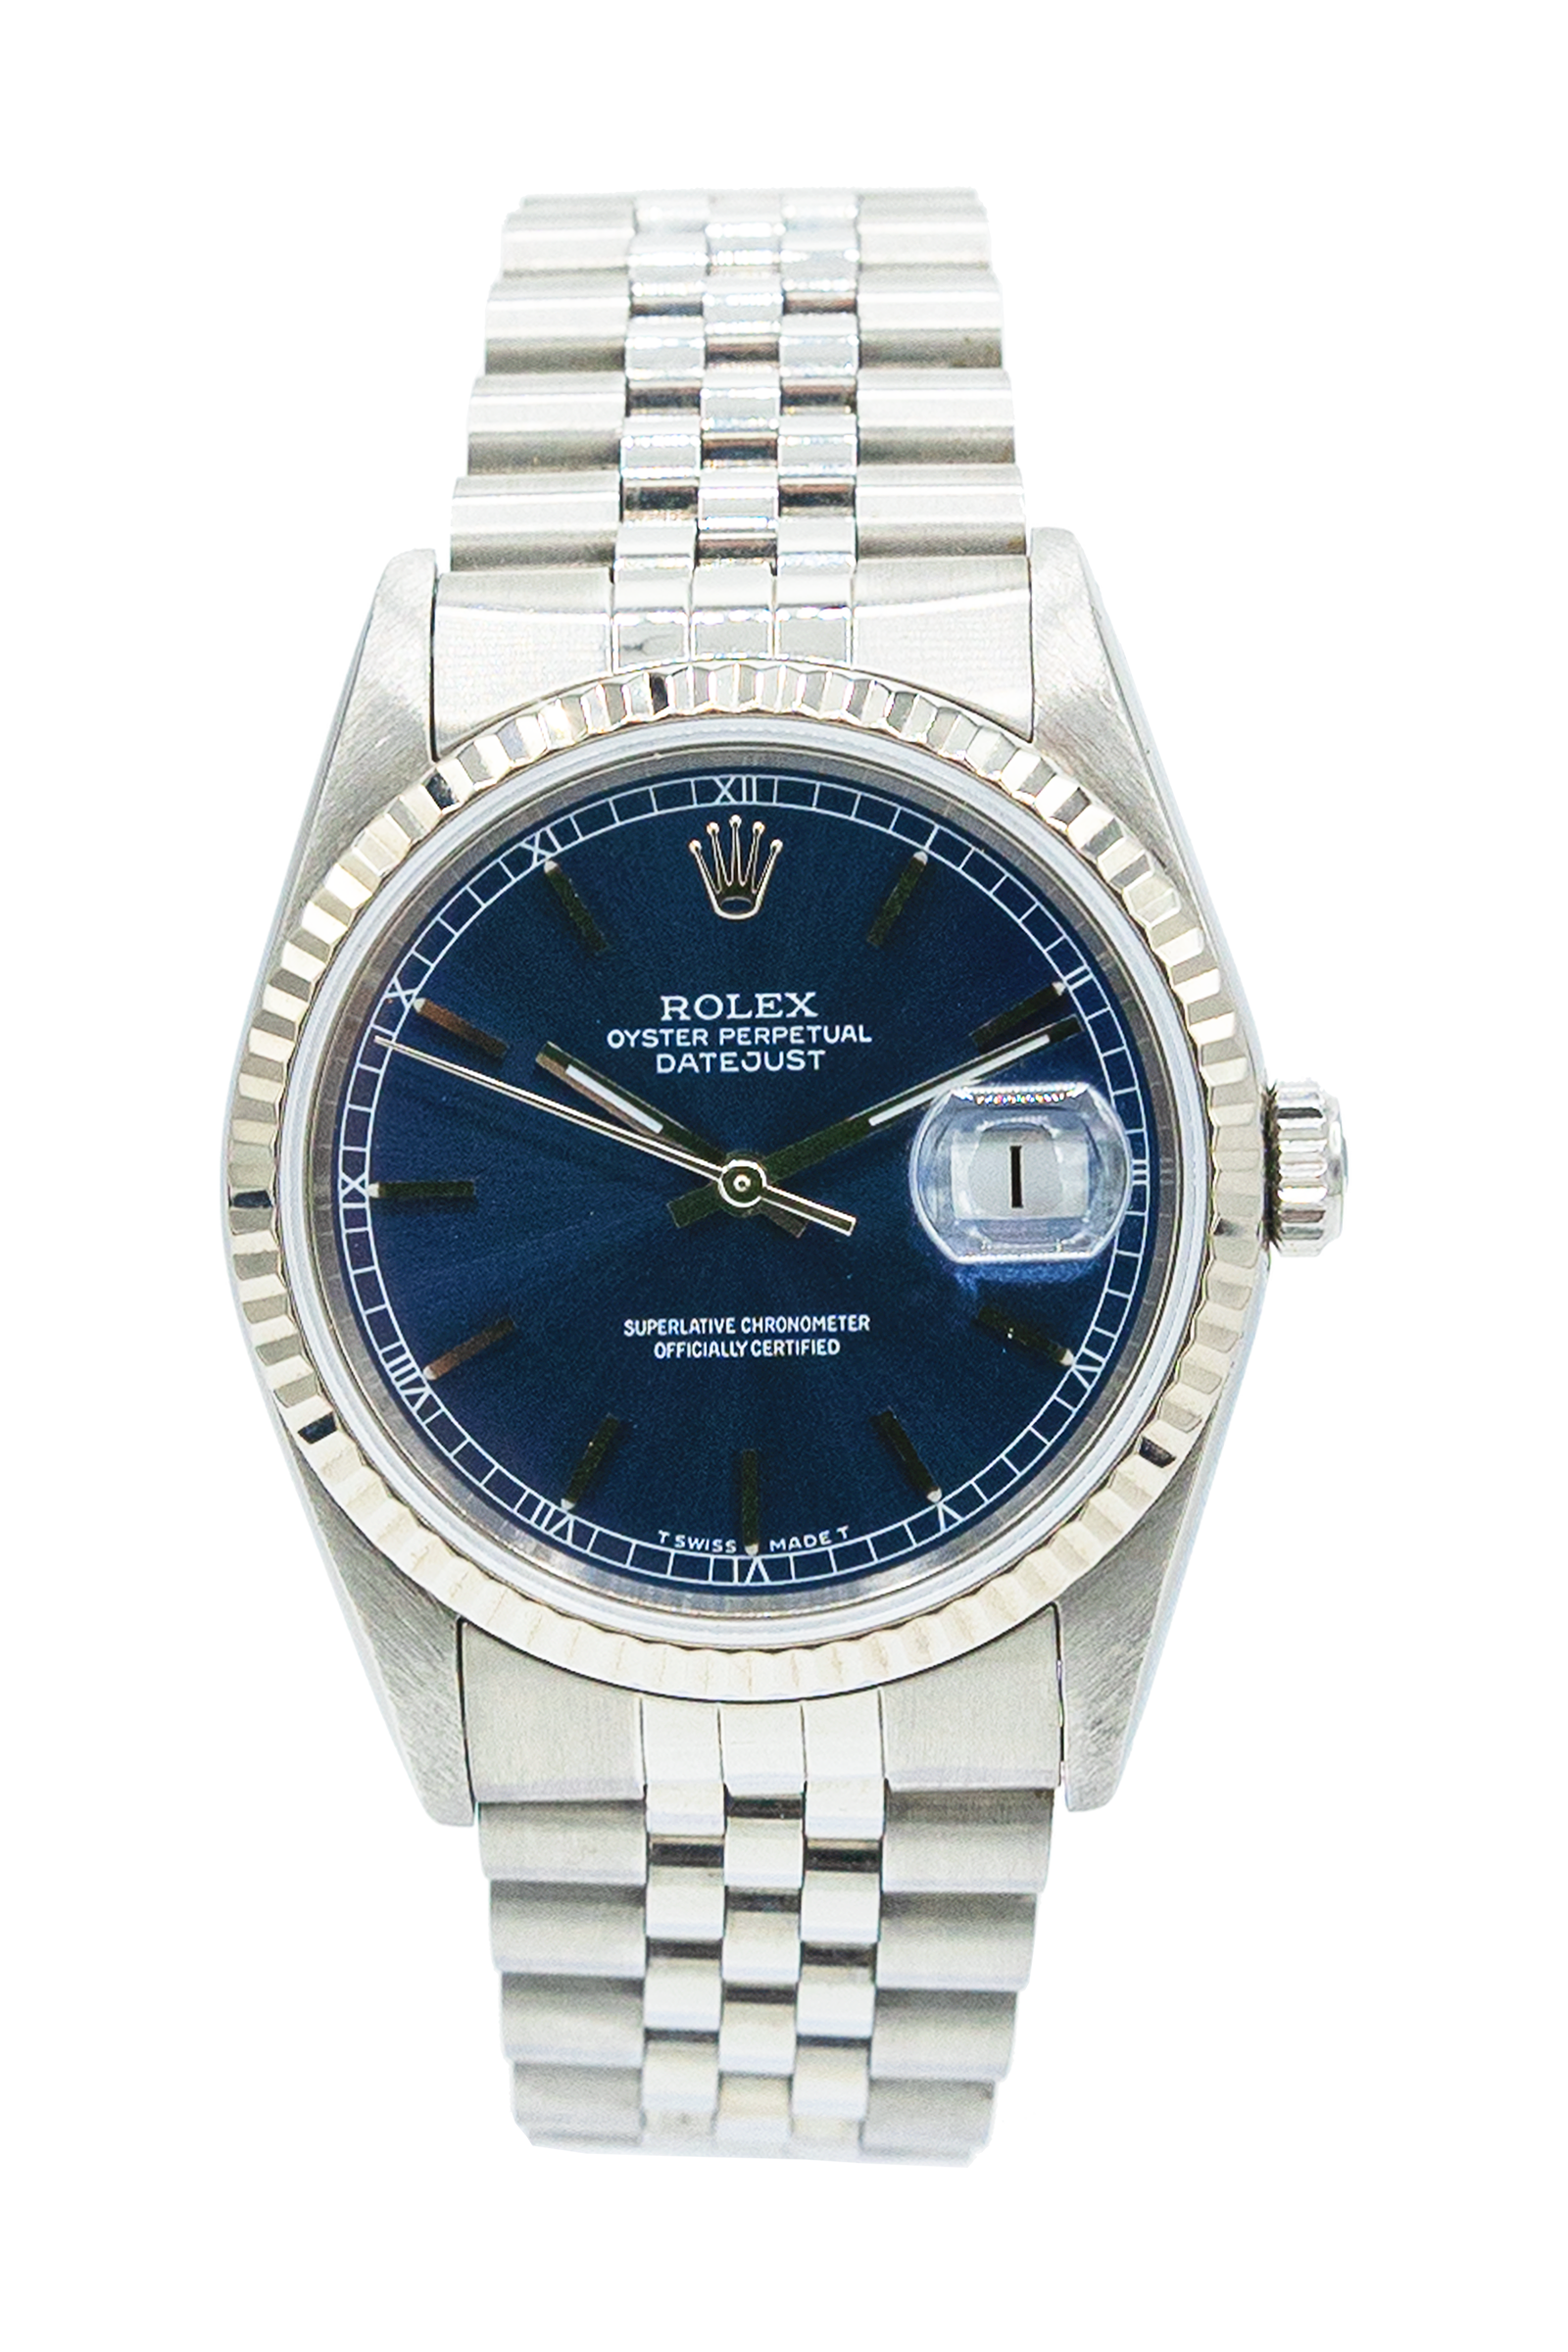 Rolex reference "16234" Datejust steel luxury watch with blue dial